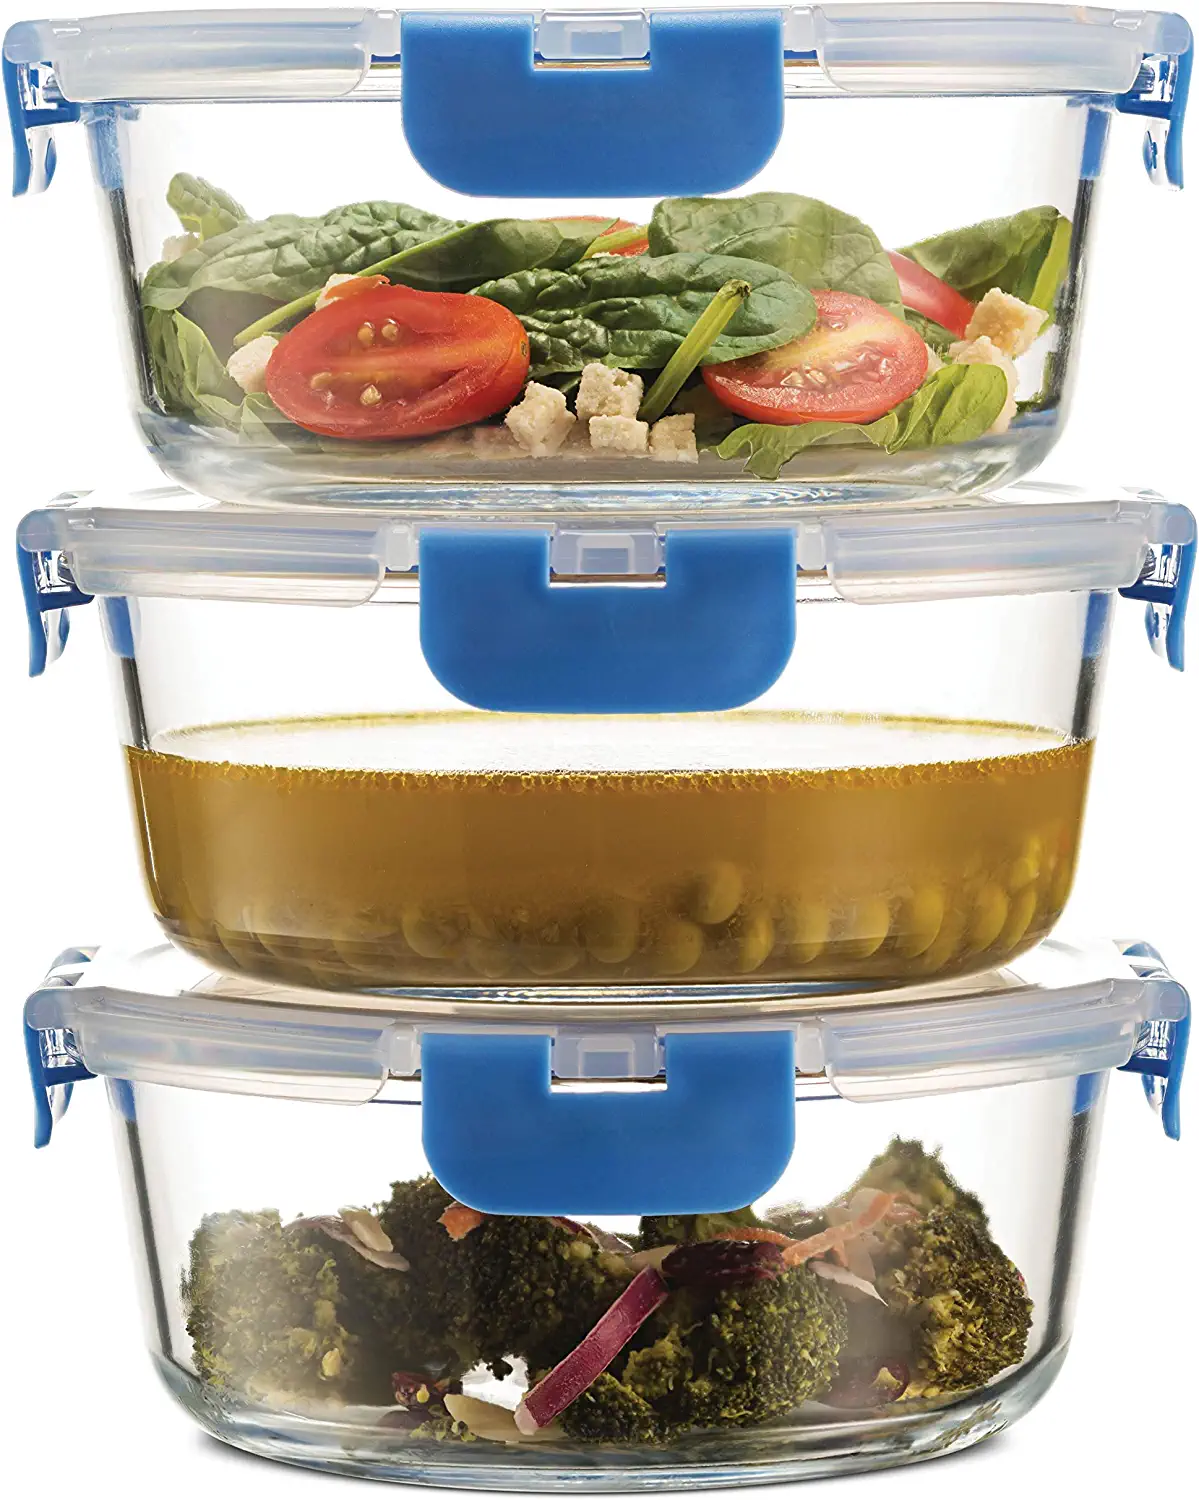  C CREST [10-Pack] Glass Food Storage Containers with